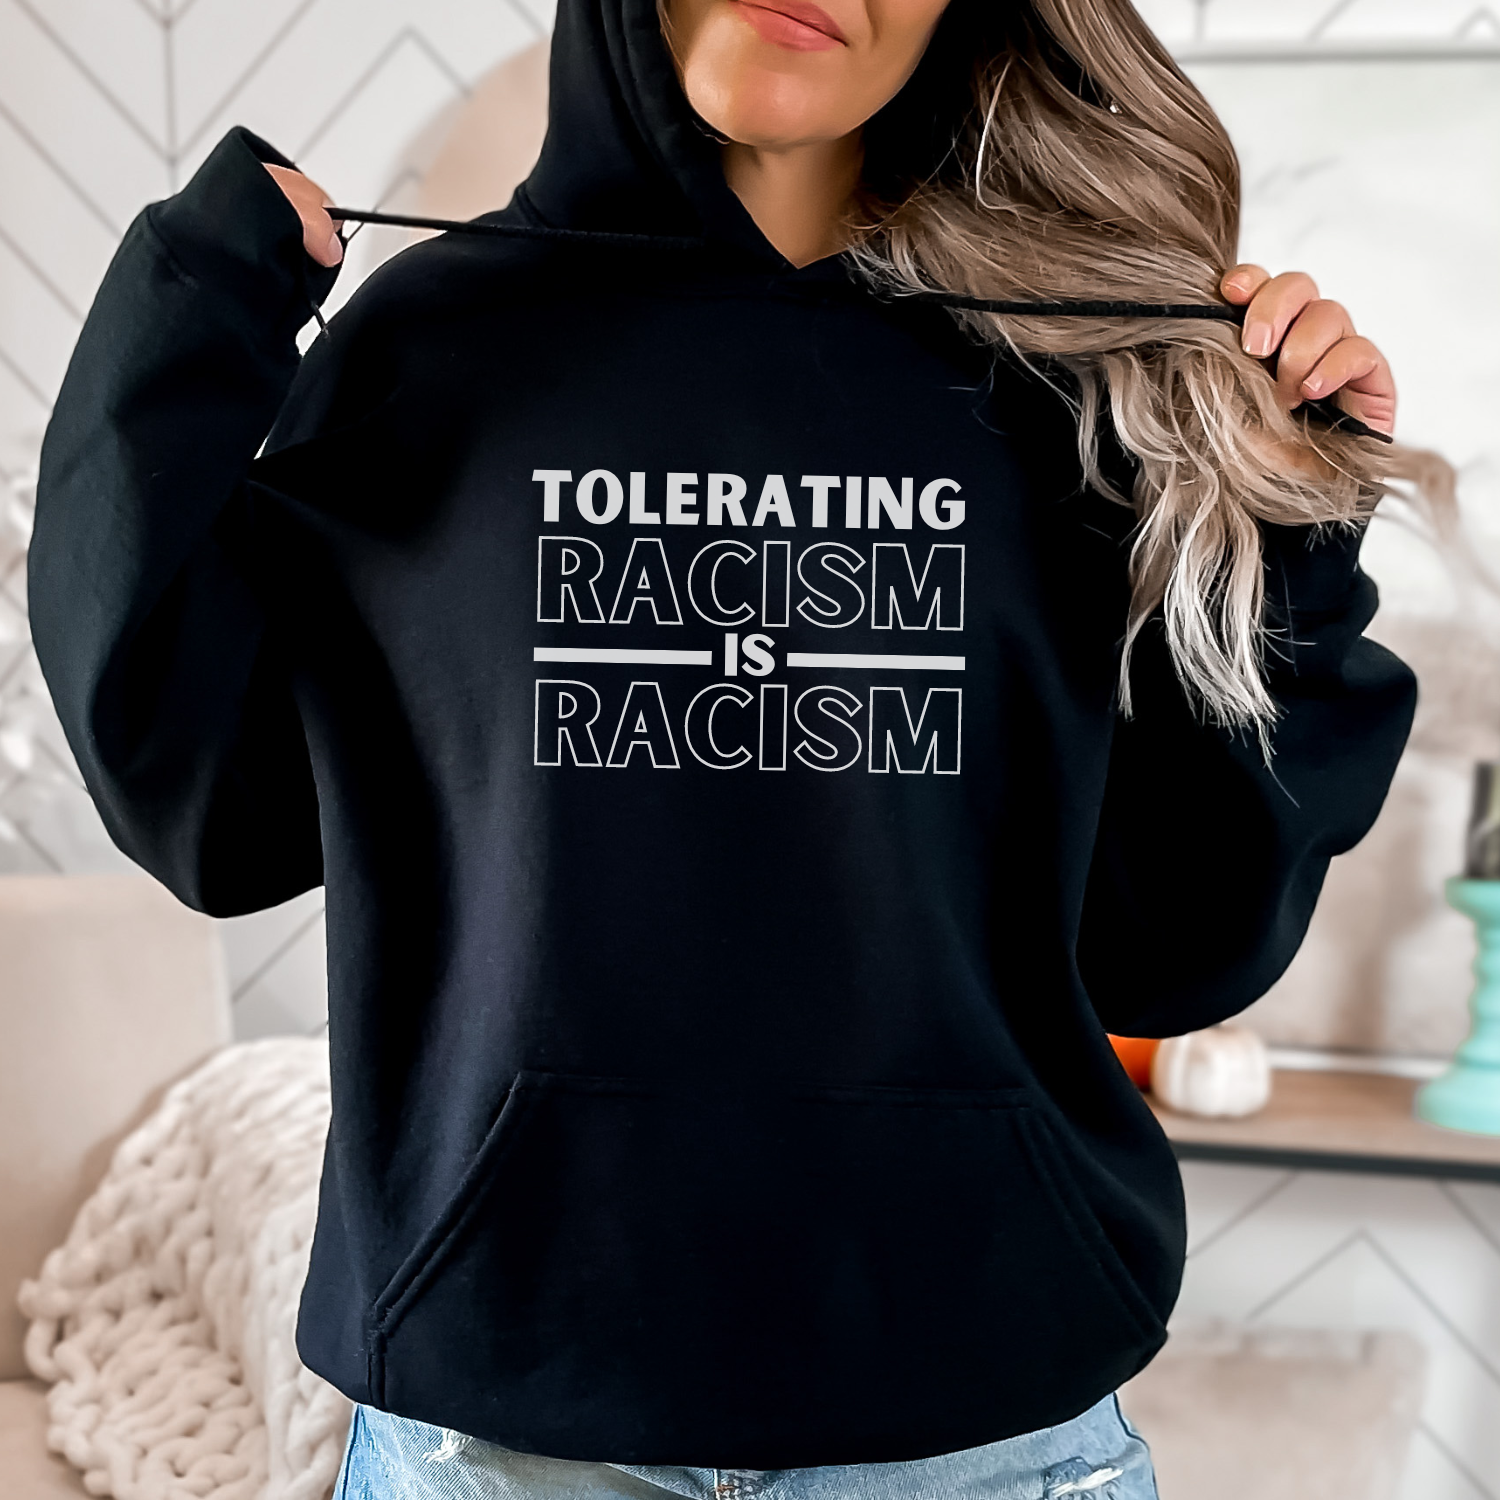 Show your commitment to social justice and awareness with this hoodie that states, 'Tolerating racism is racism.' Gildan 18500 hoodie sweatshirt in color black.